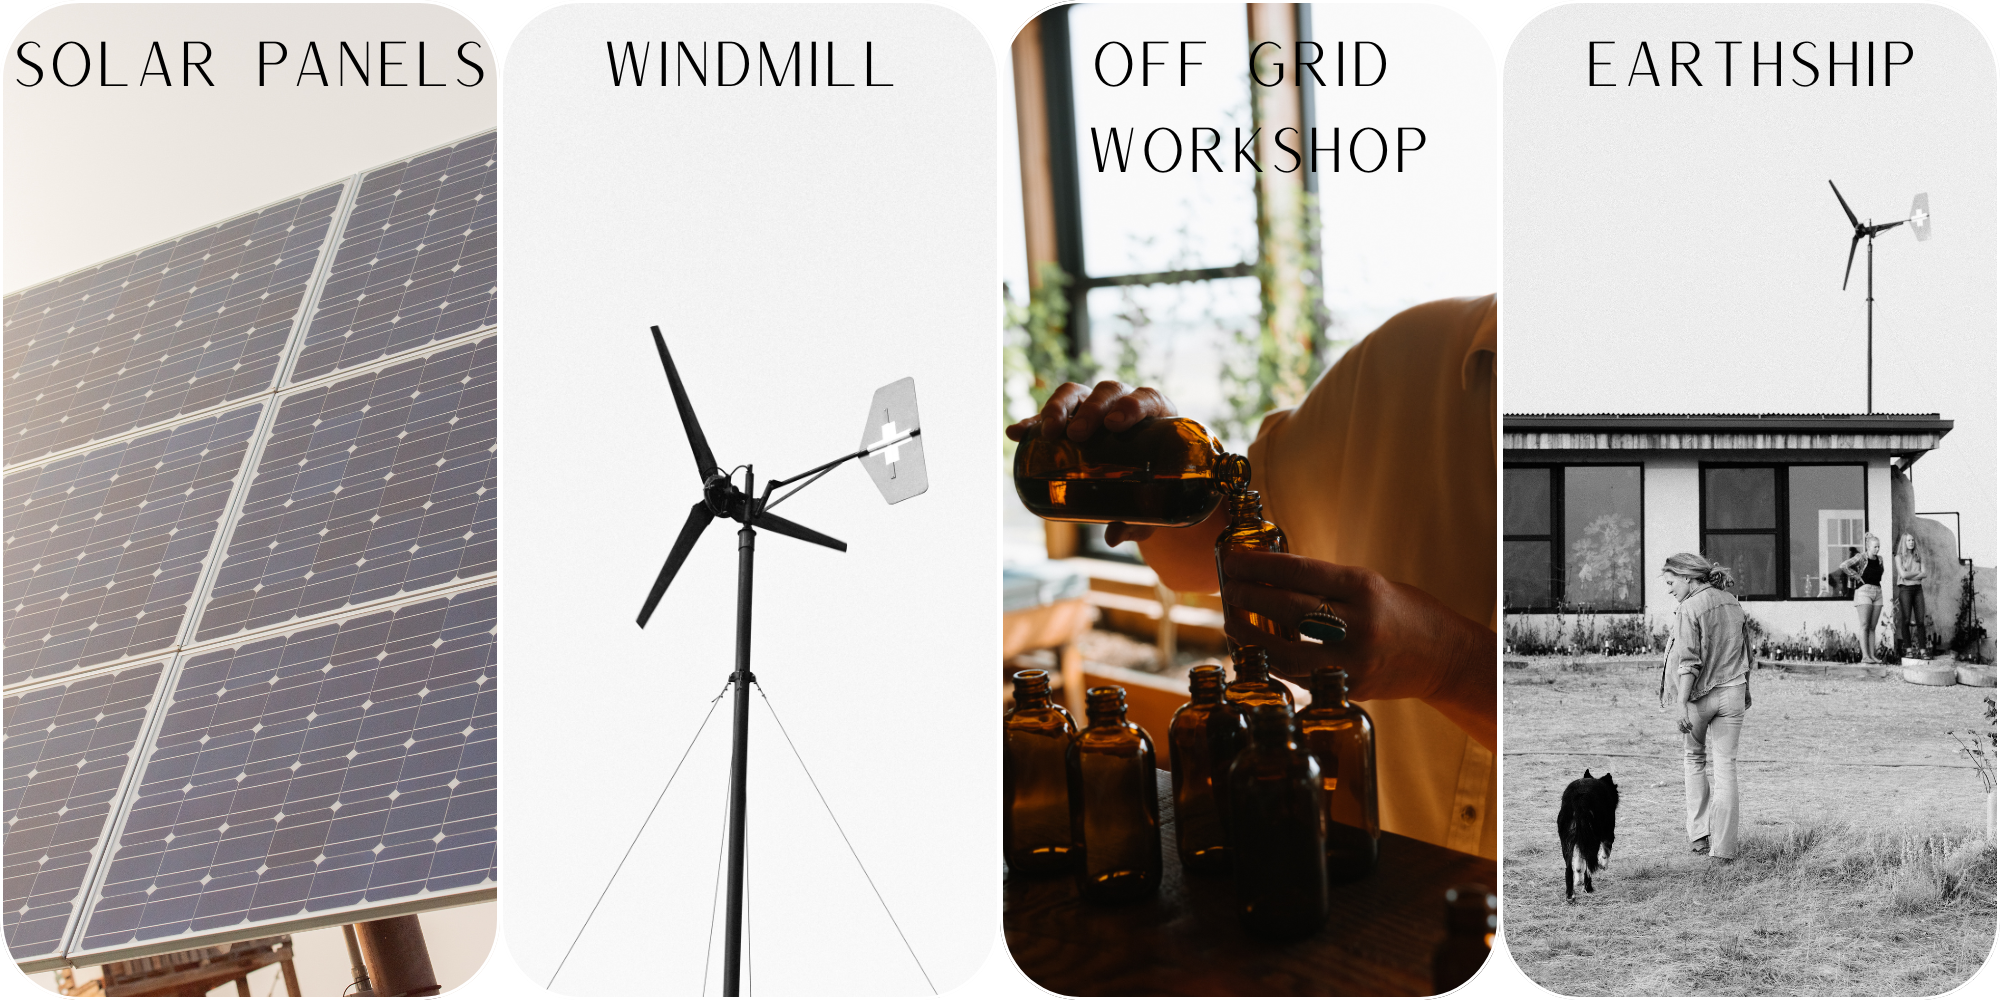 Off-grid workshop powered by sun and wind where all Queen of the Meadow products are made. Click image for more information.